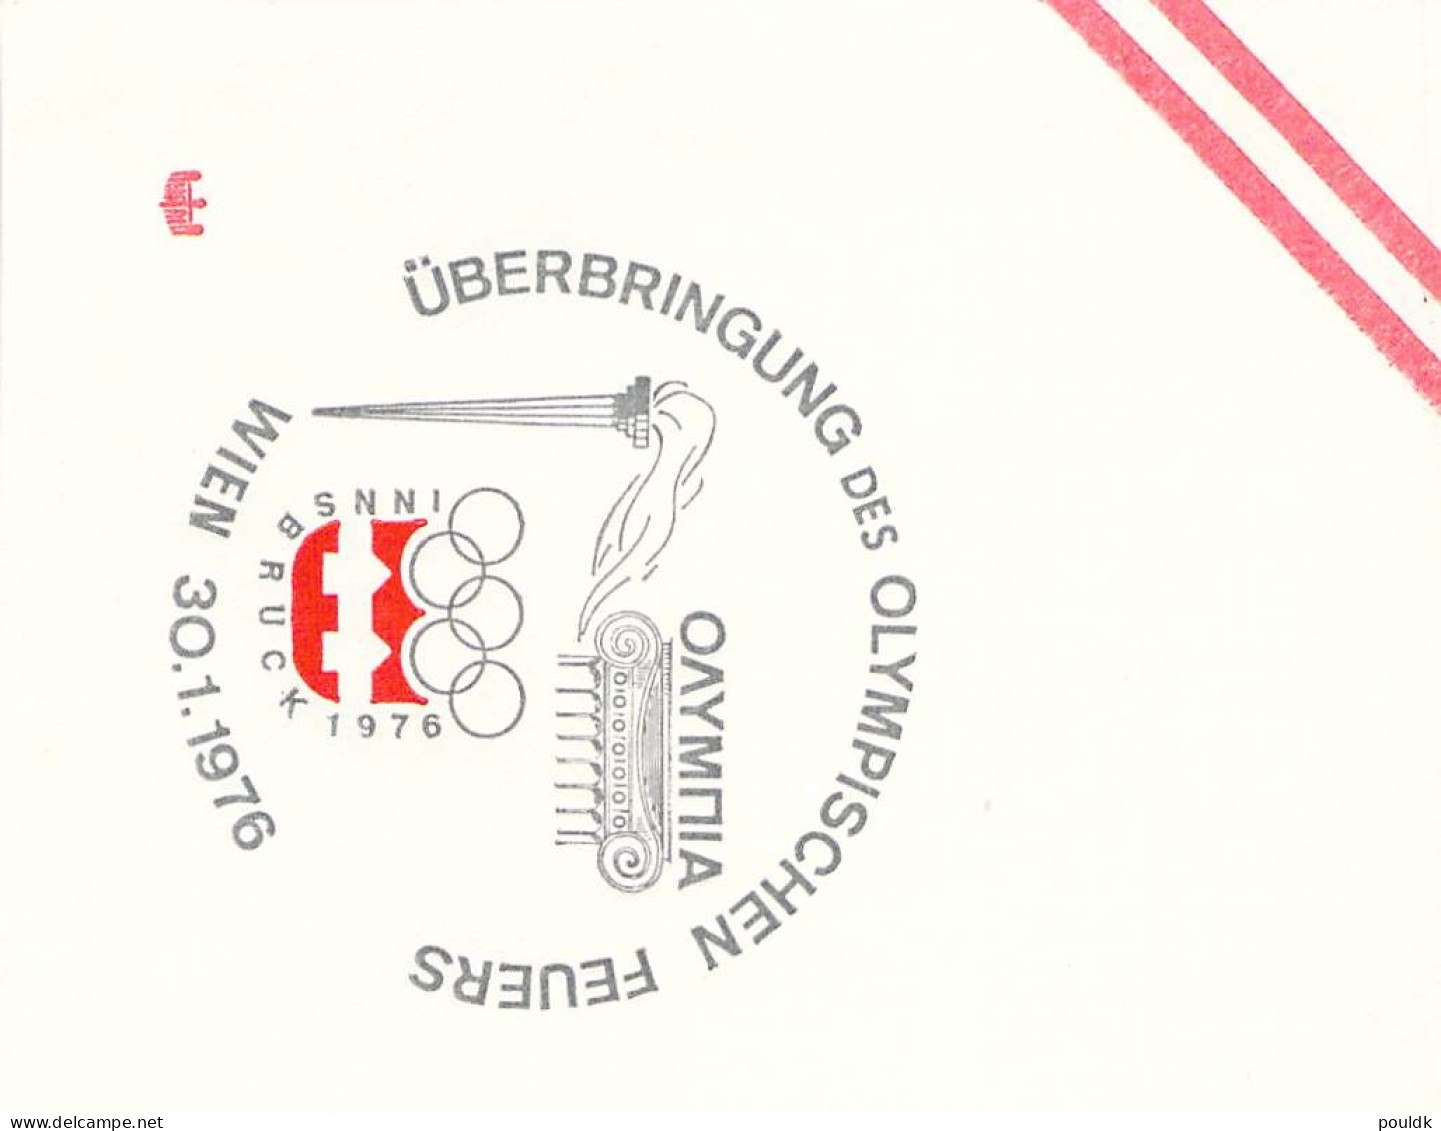 Olympic Games in Innsbruck 1976. 10 Torch Relay Covers from Austria. Postal Weight 0,09 kg. Please read Sales Conditions